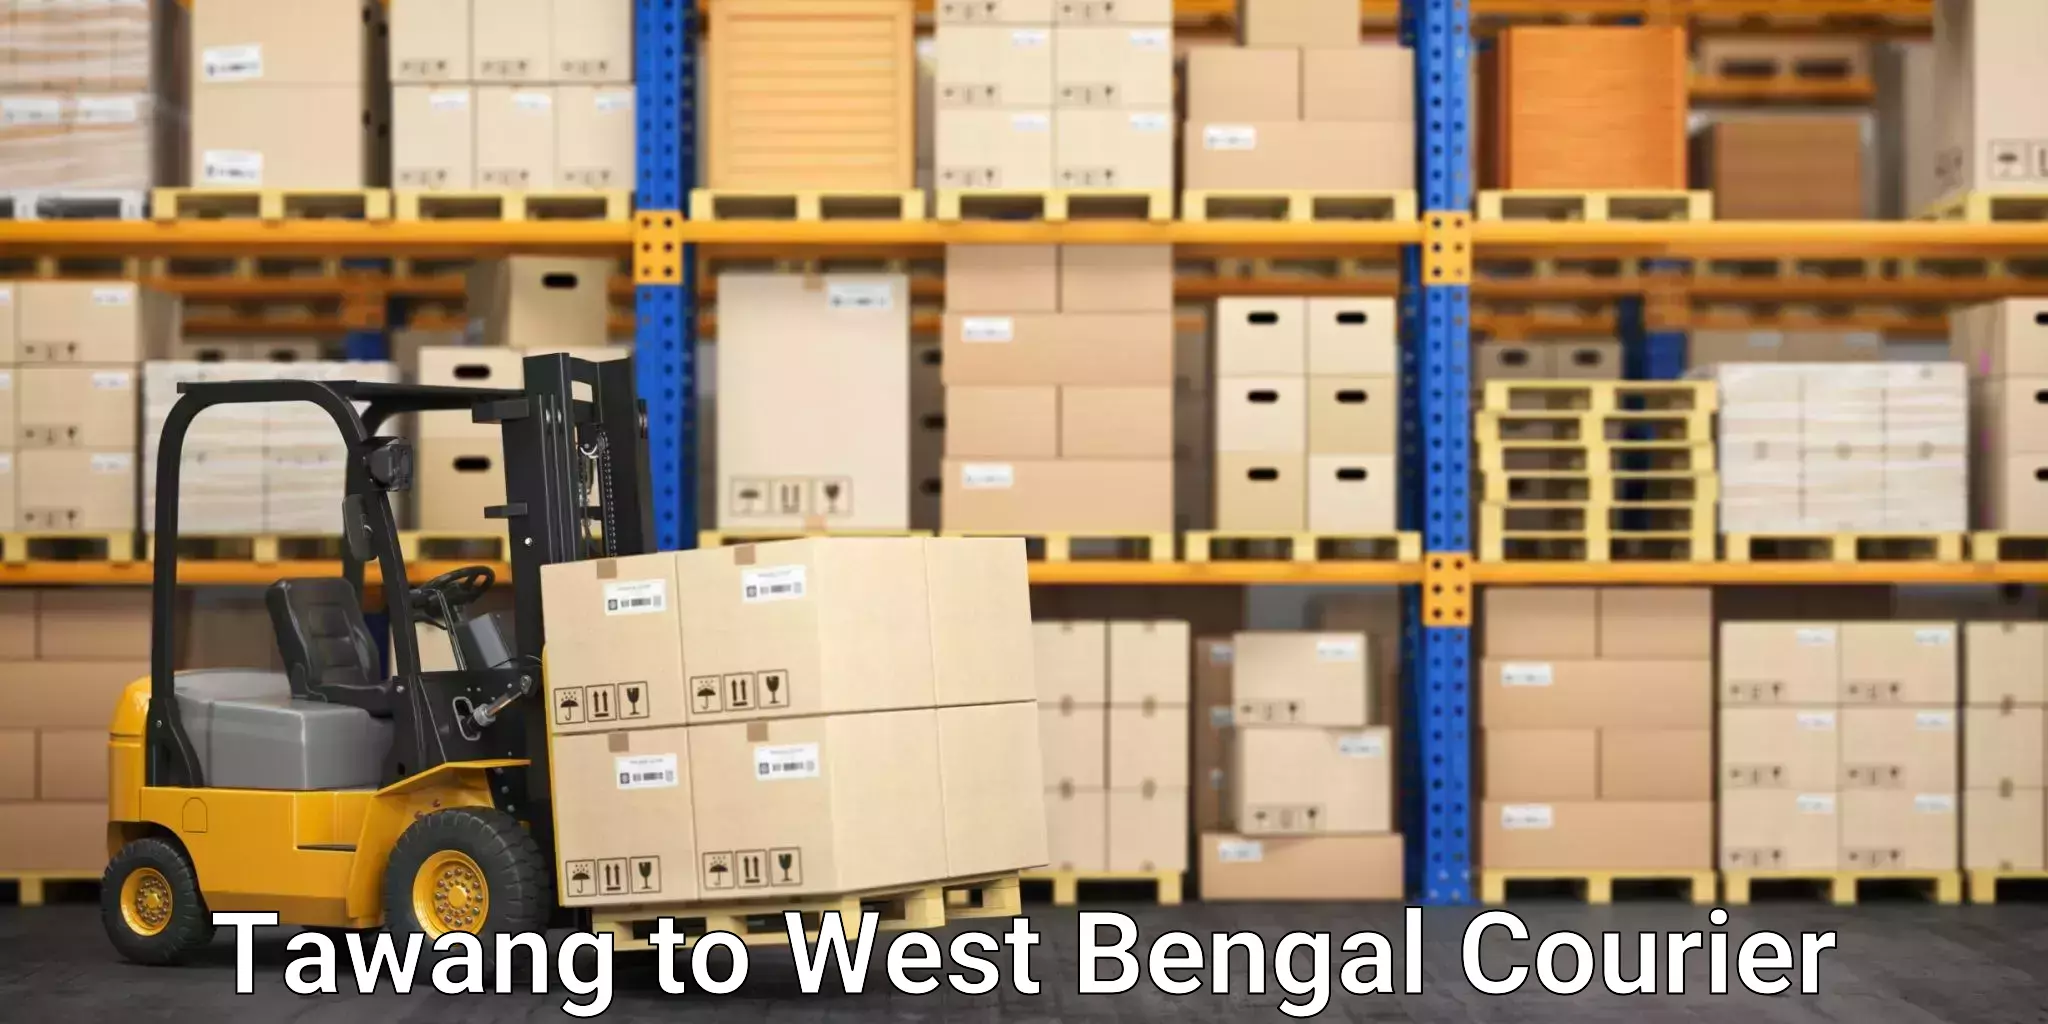 On-call courier service Tawang to West Bengal